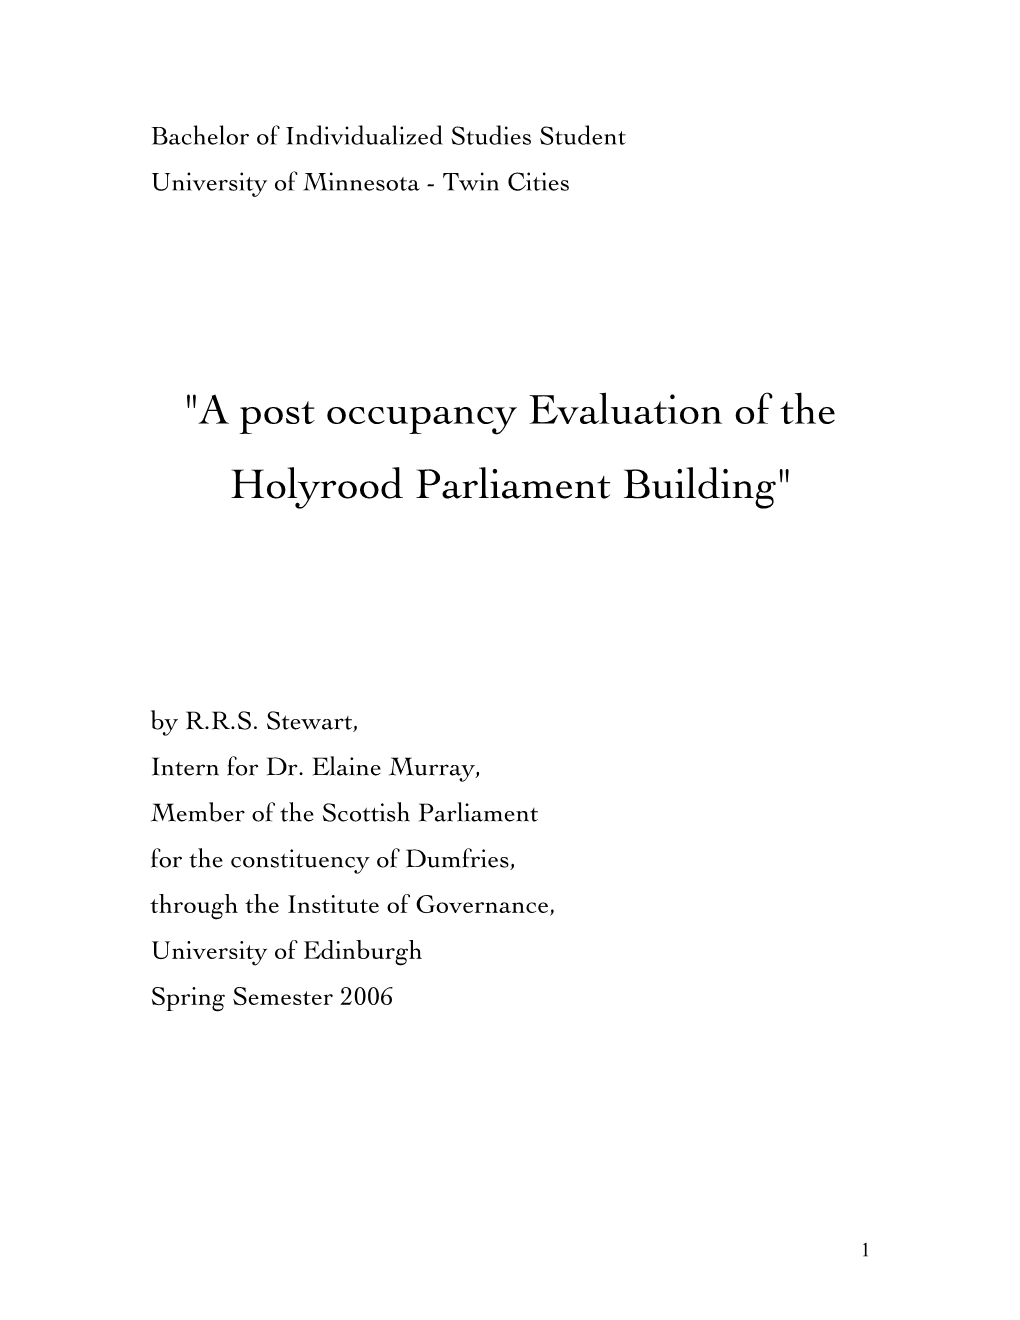 "A Post Occupancy Evaluation of the Holyrood Parliament Building"